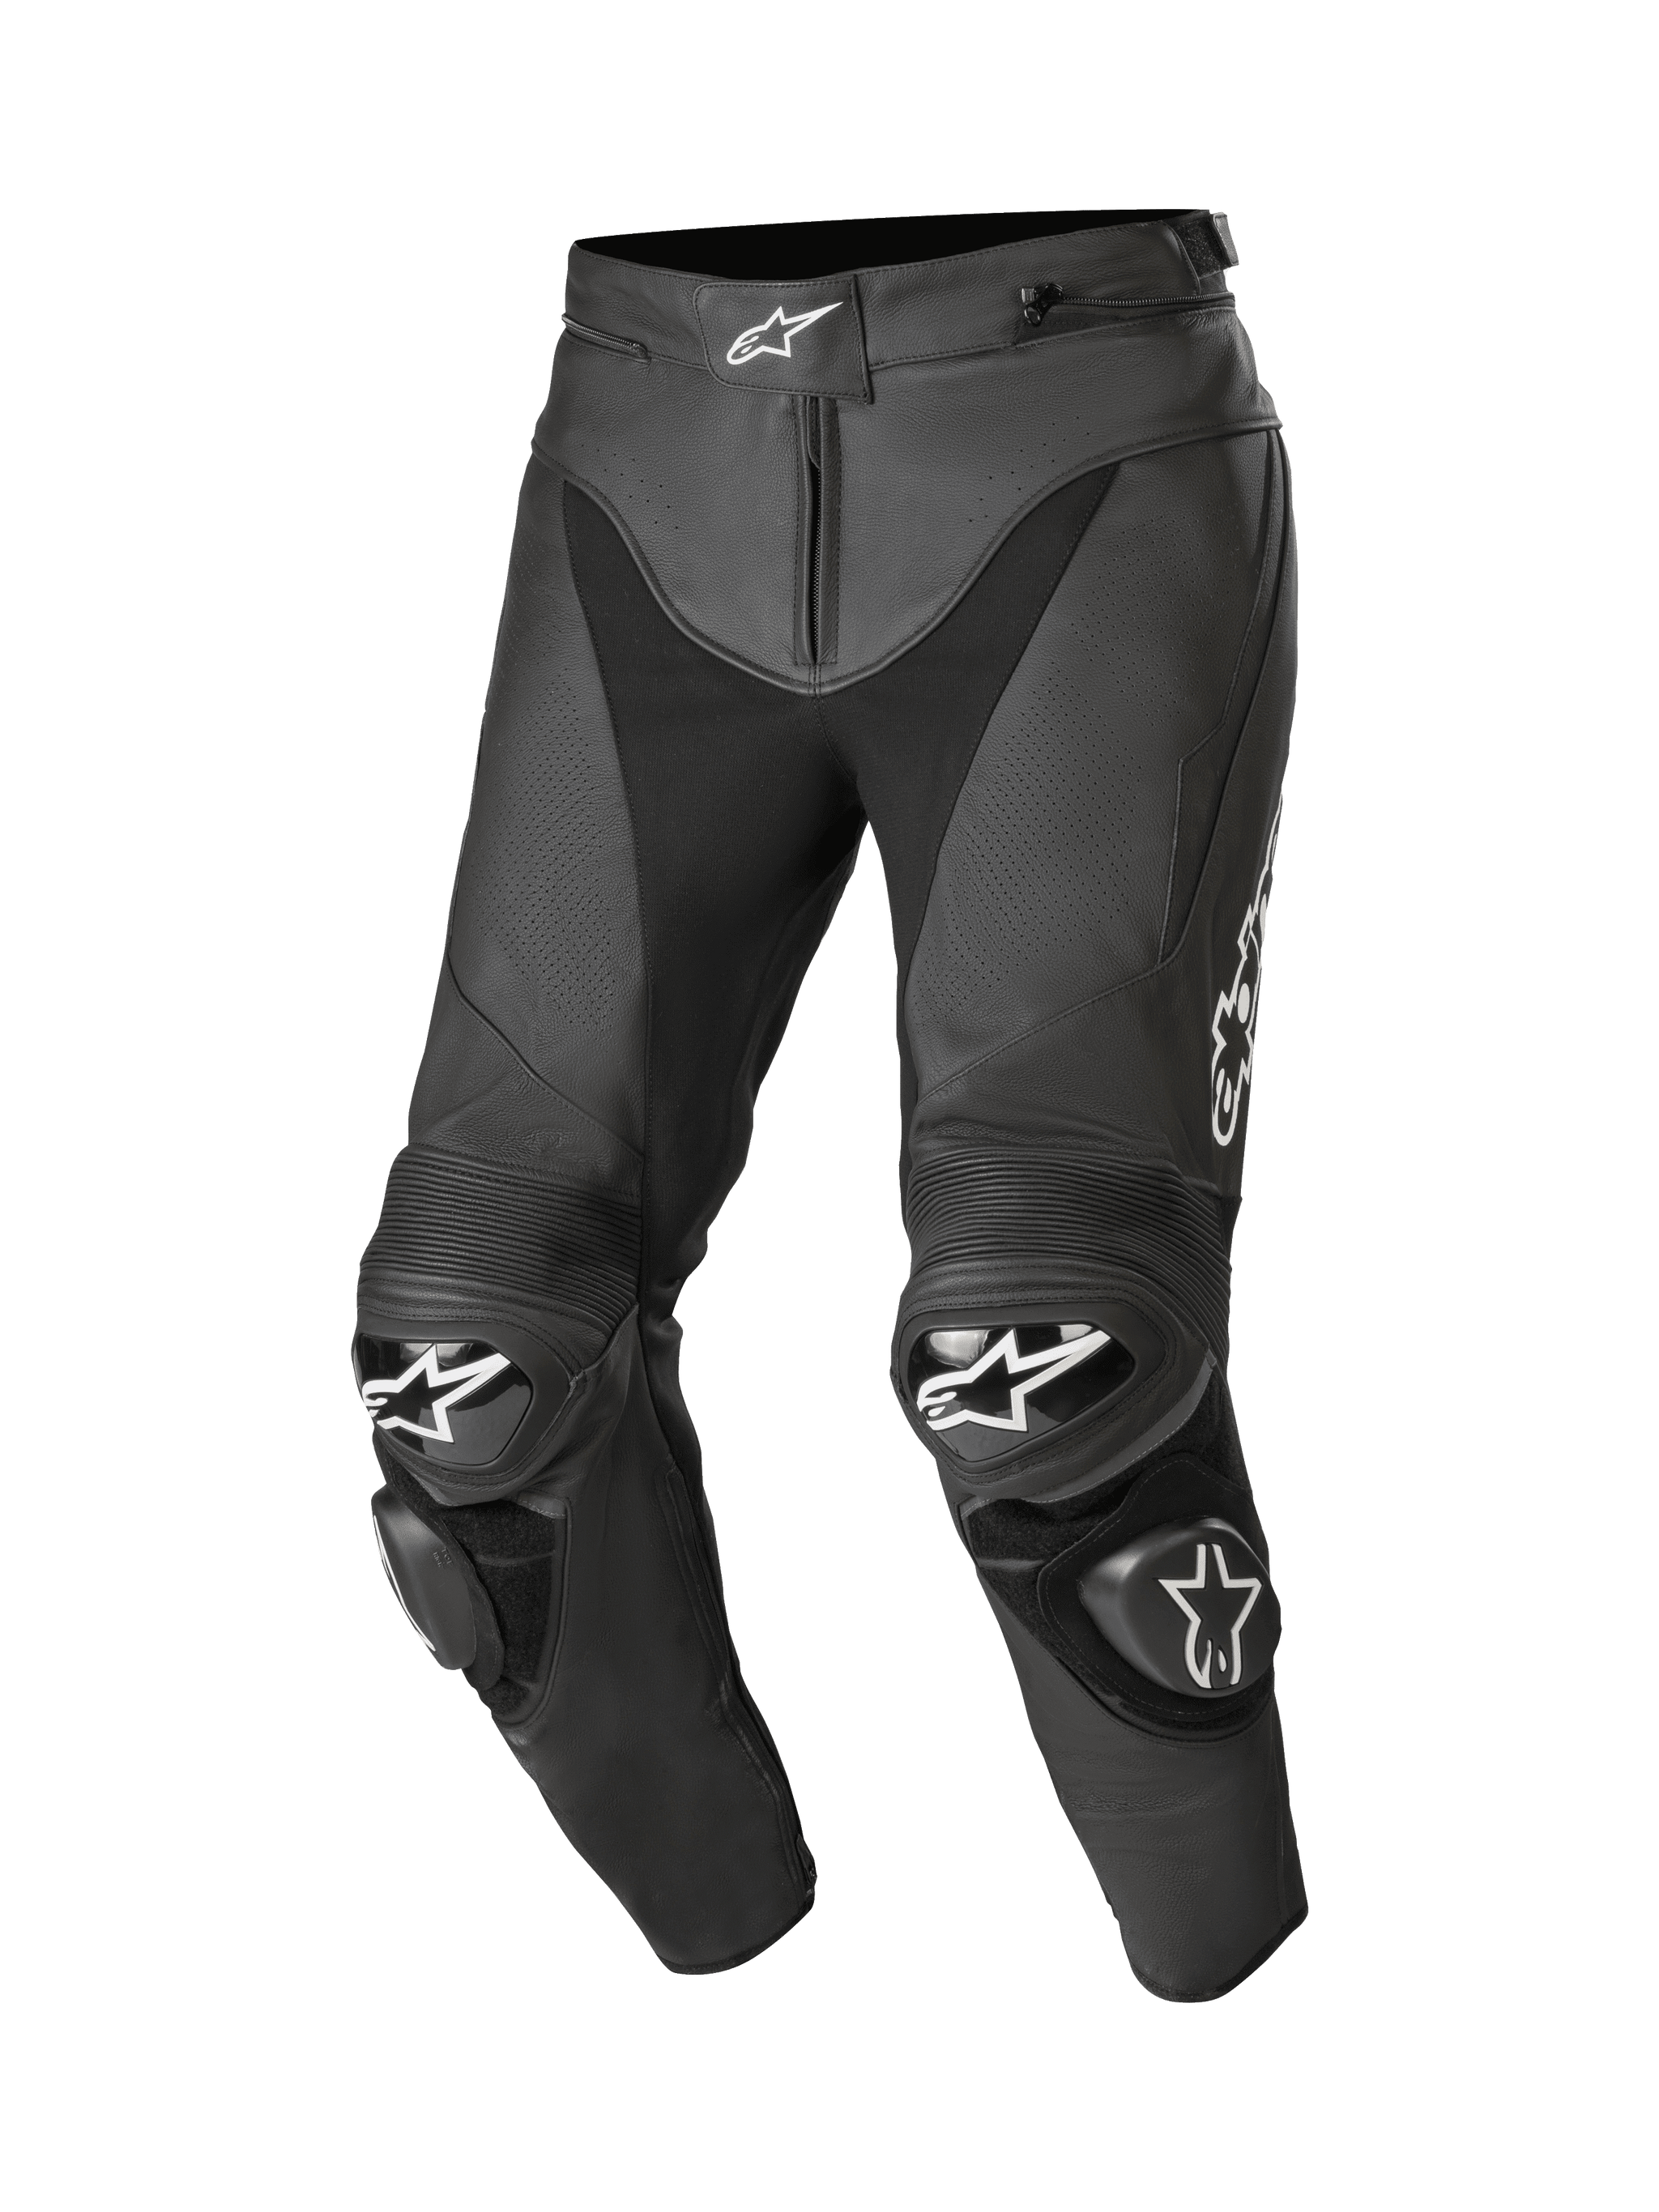 Motorcycle Pants | Alpinestars® Official Site